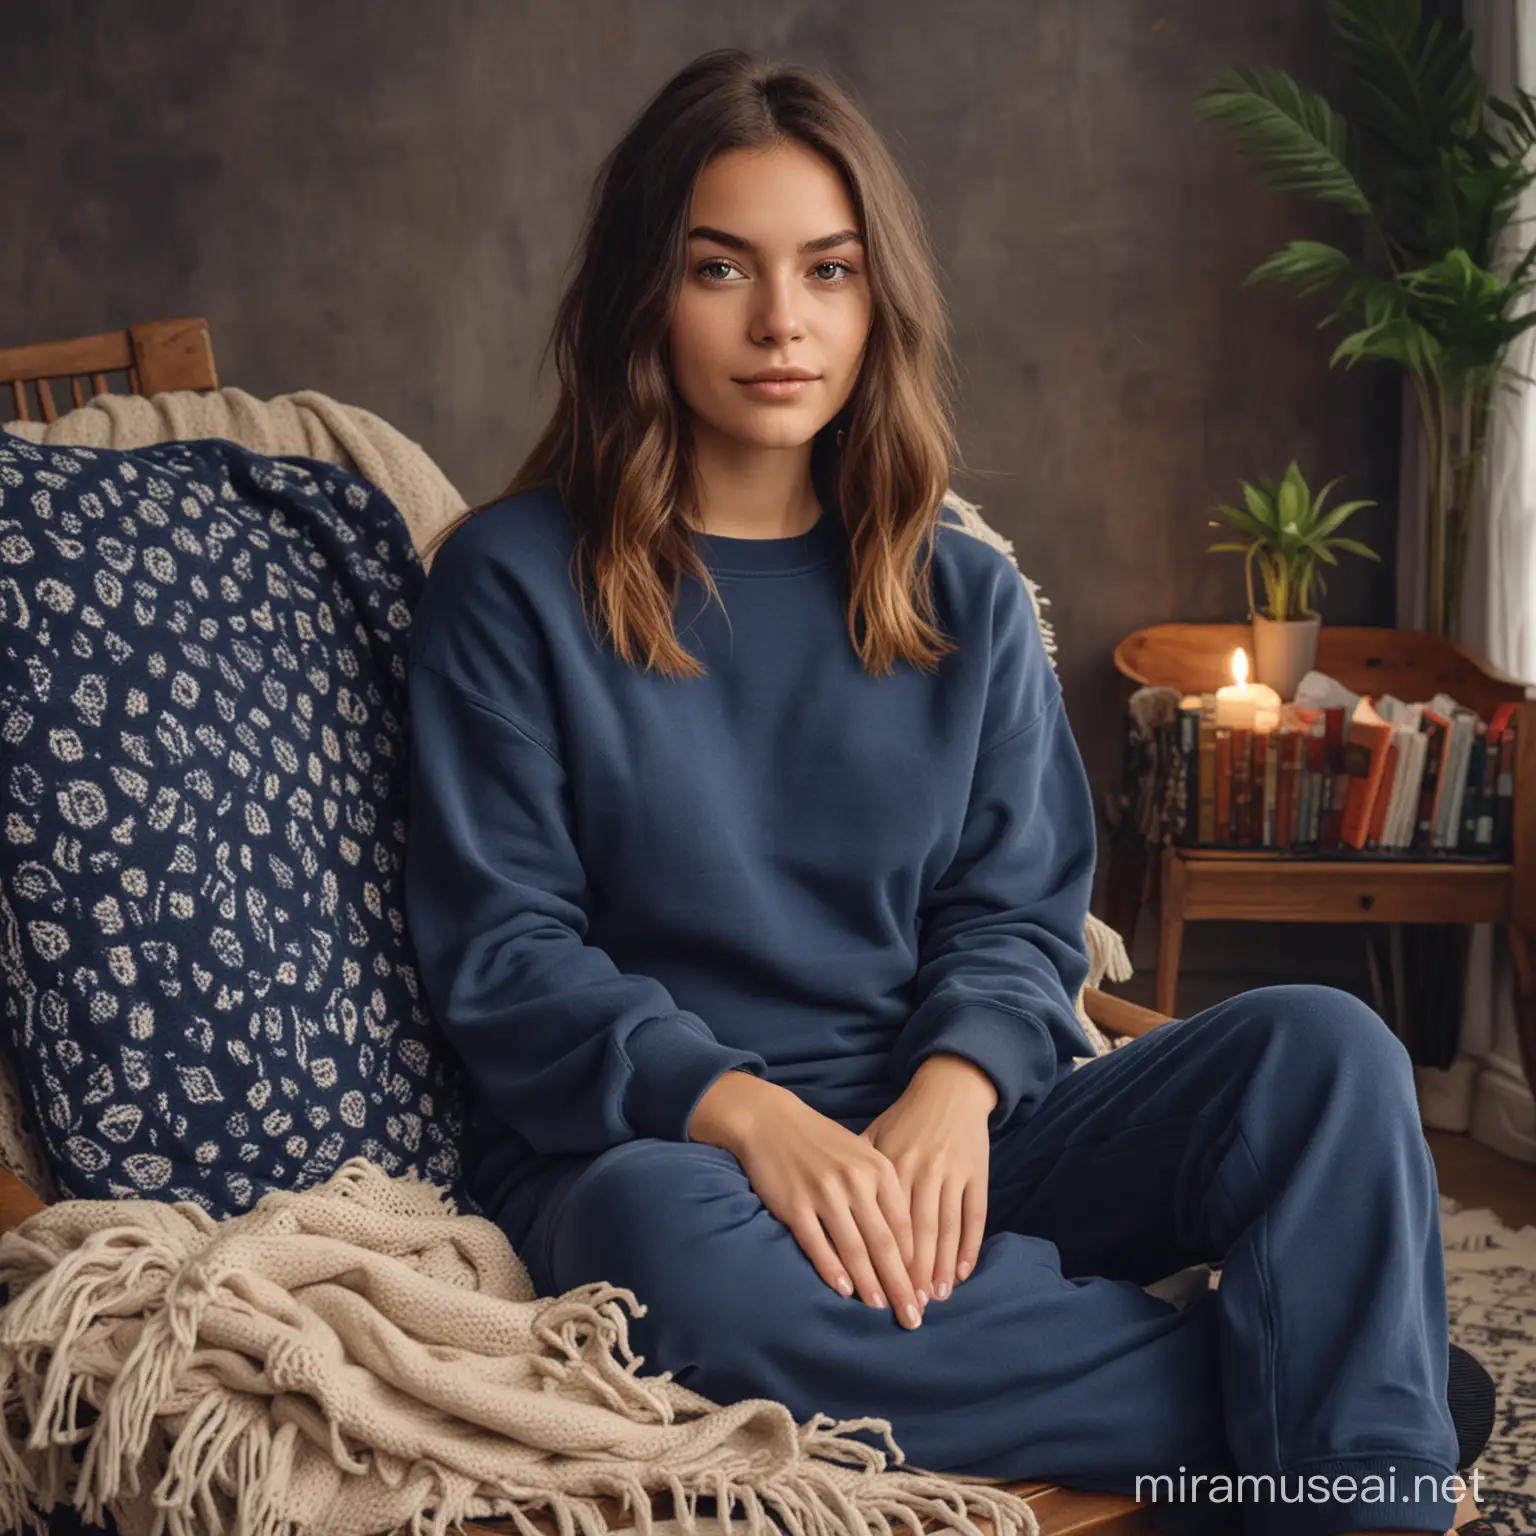 young women, wearing a Navy color crewneck sweatshirt, boho background, sitting down on a chair, facing the camera, with pillows and blanket,  